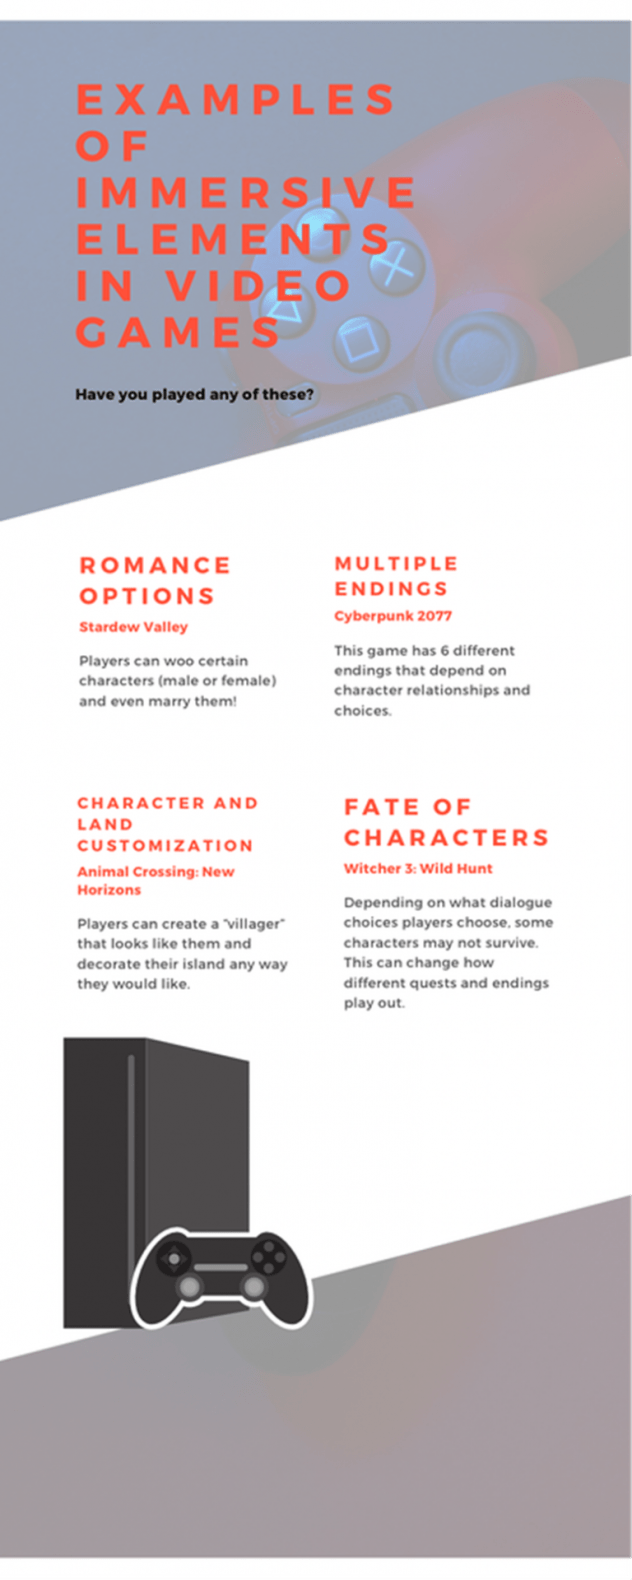 Infographic on the types of immersion elements in video game characters.